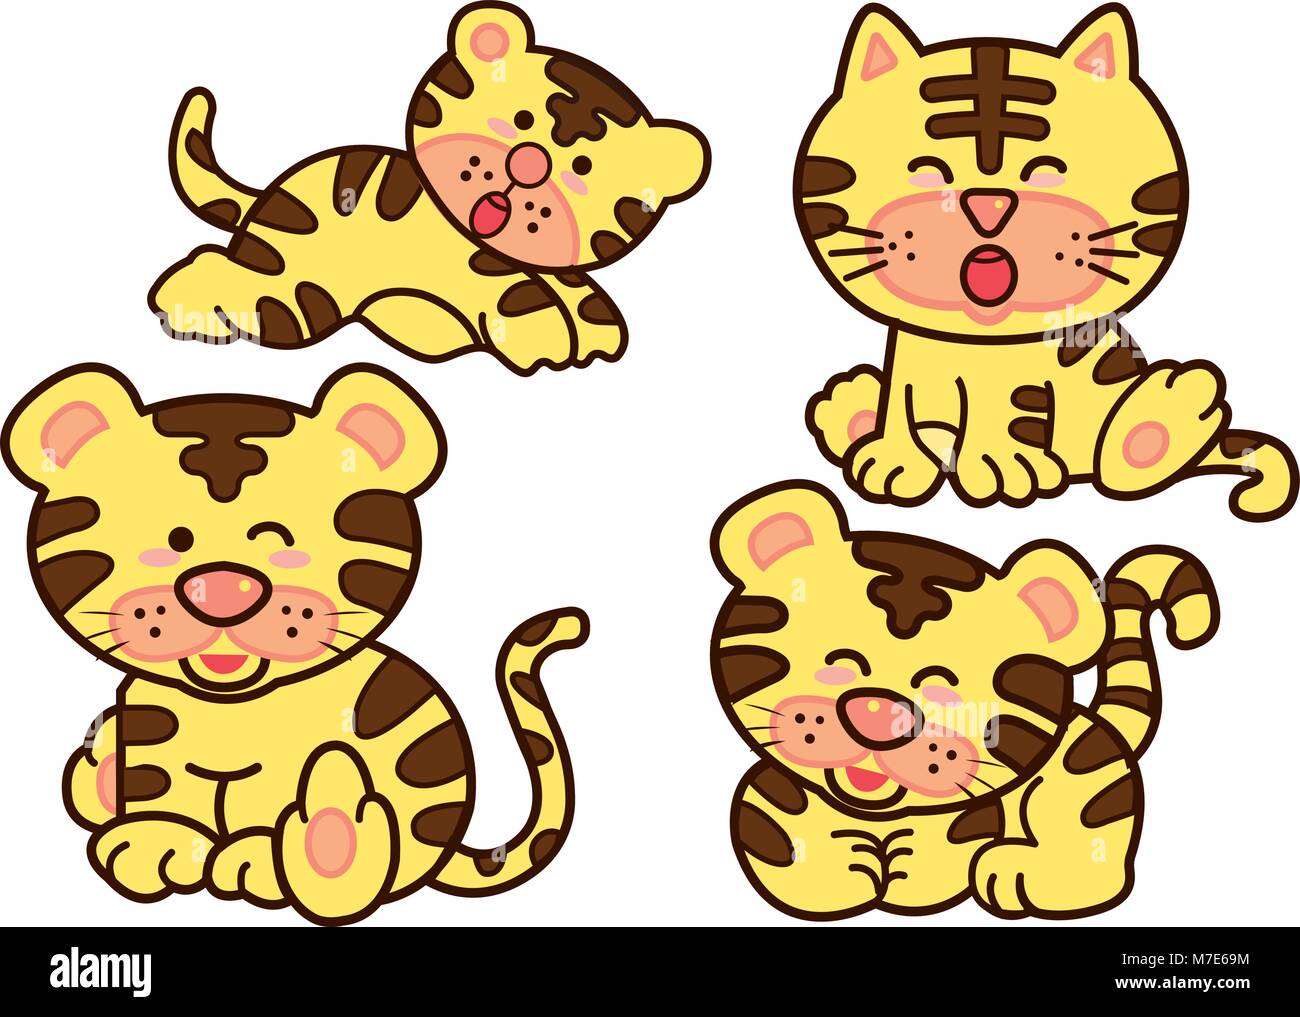 Family Tiger cartoon character design. Cute animal illustration on white isolate. Stock Vector